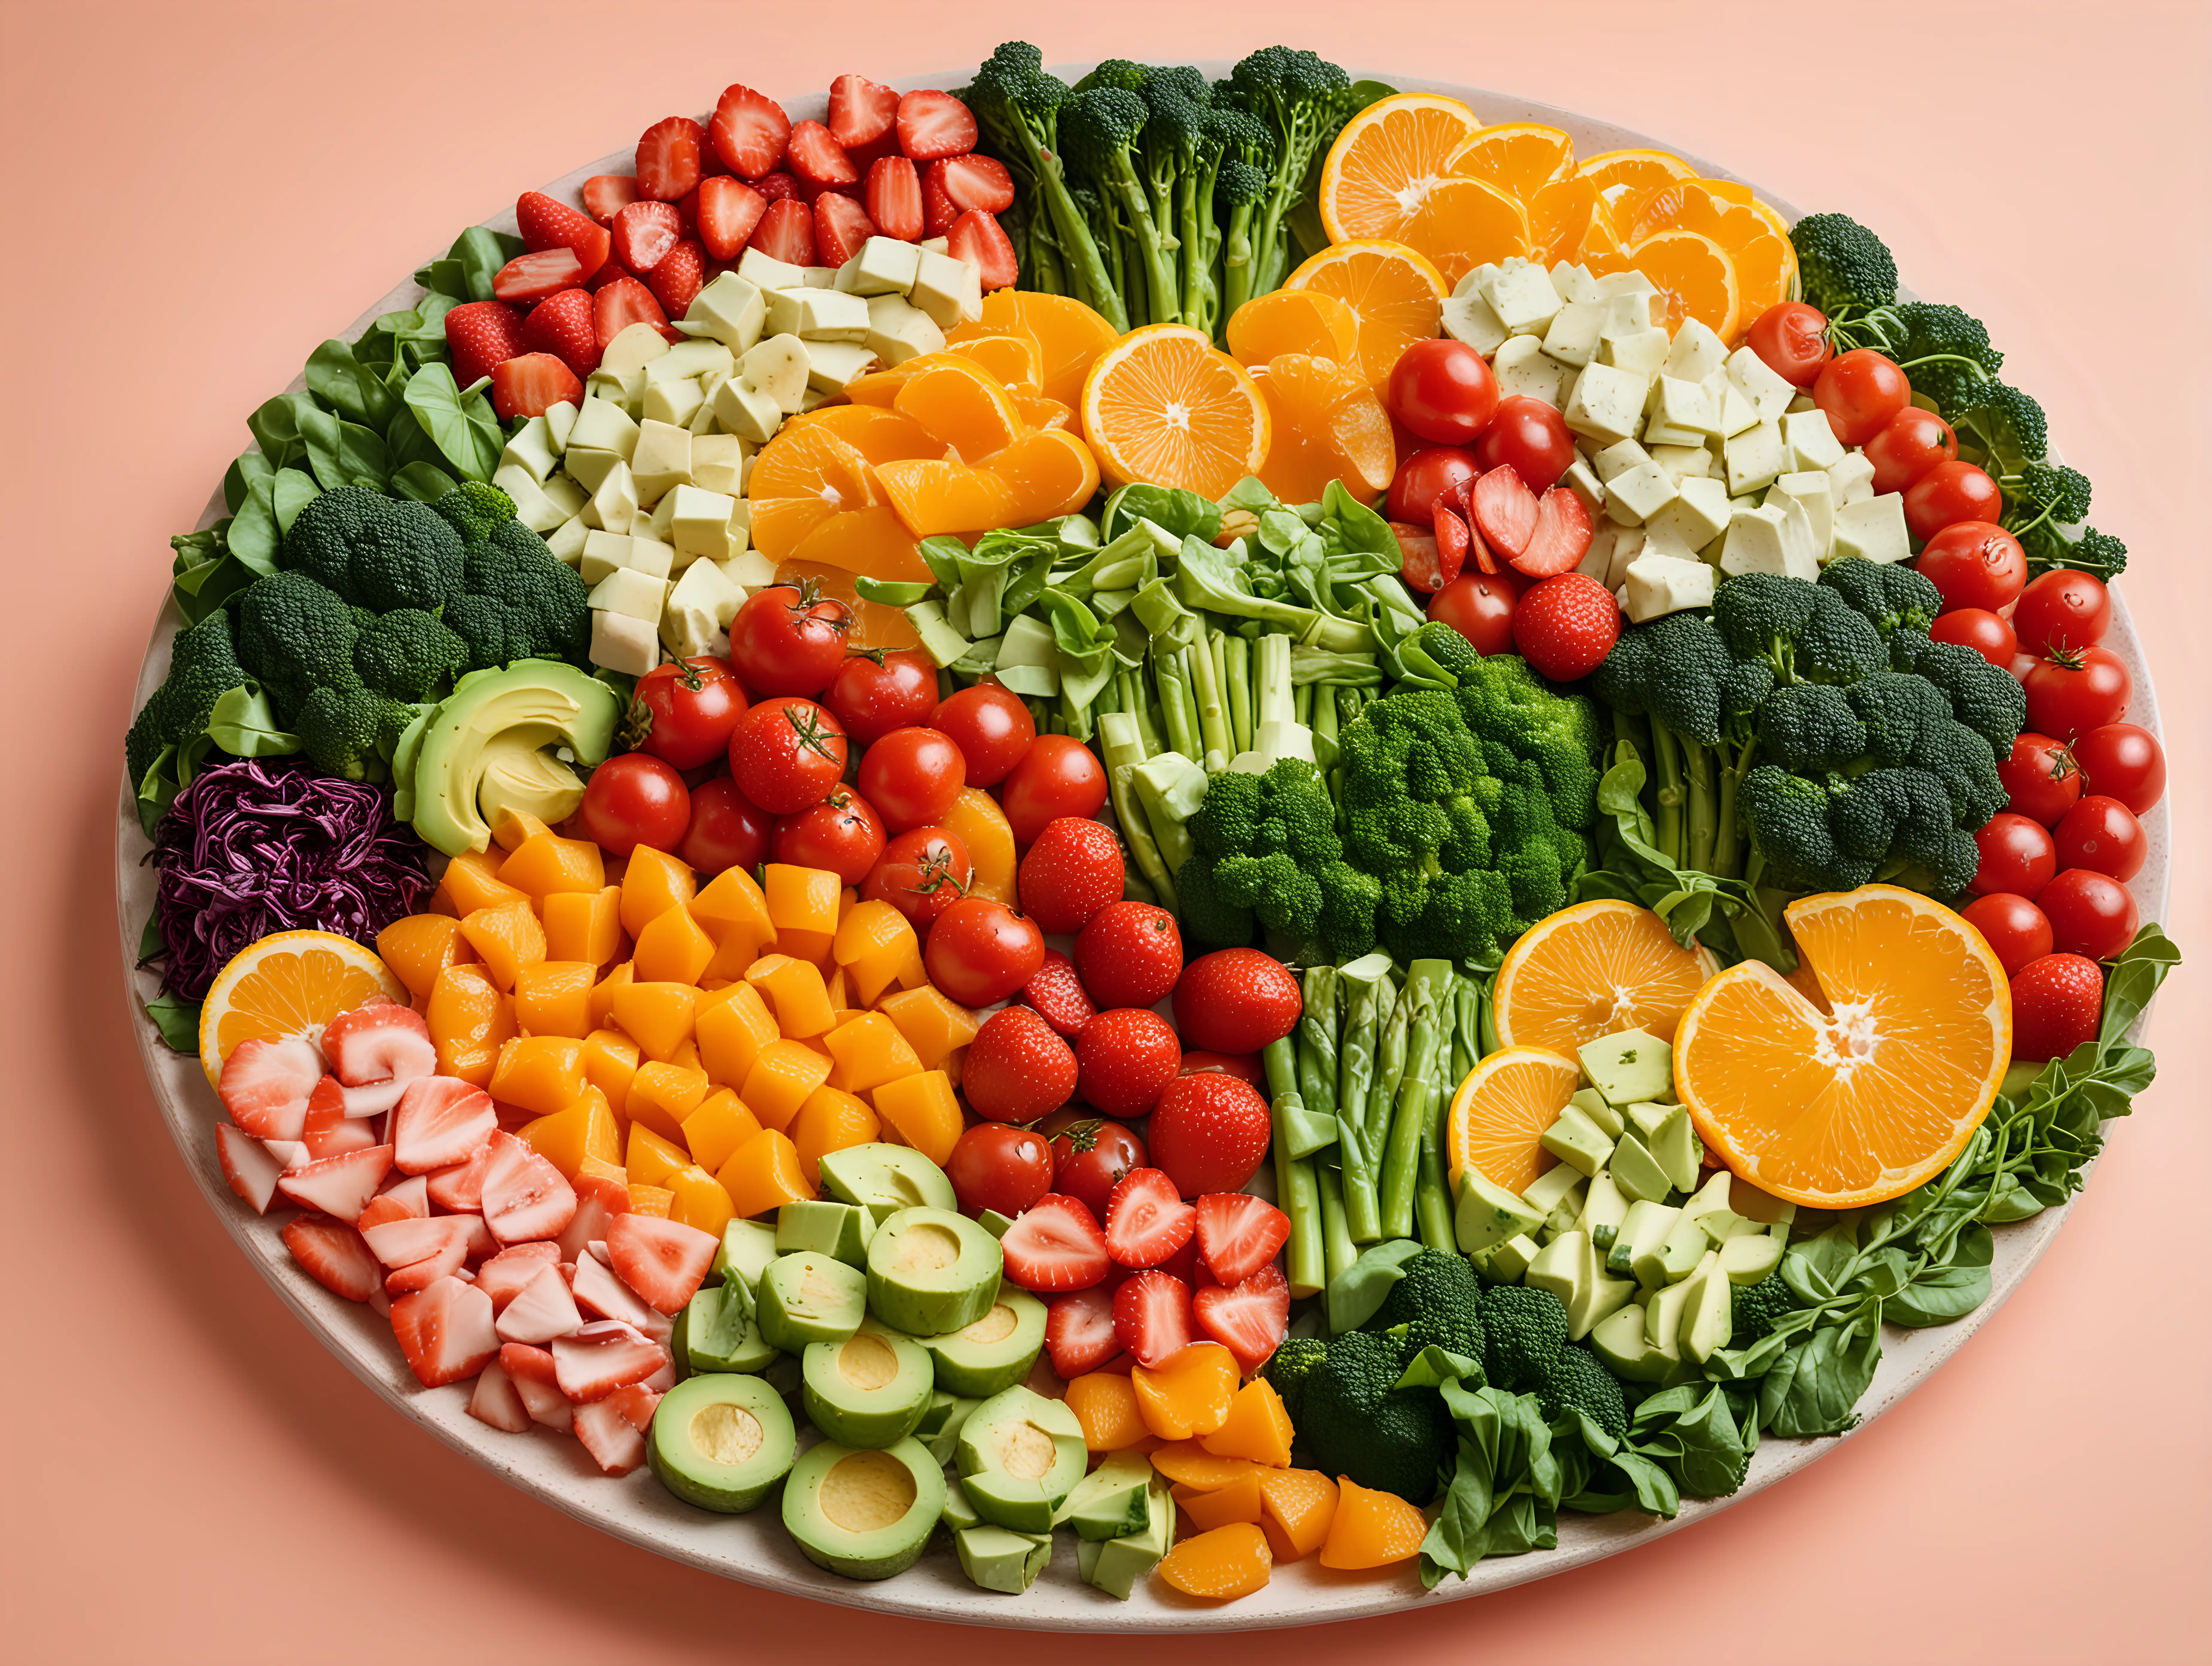 A colorful plate filled with fruits and vegetables that are high in glutathione, such as broccoli, avocado, asparagus, spinach, kale, oranges, strawberries, and tomatoes. The foods are neatly arranged in a circular pattern with each type of food clearly visible. The background is a gradient of soft pastel colors.